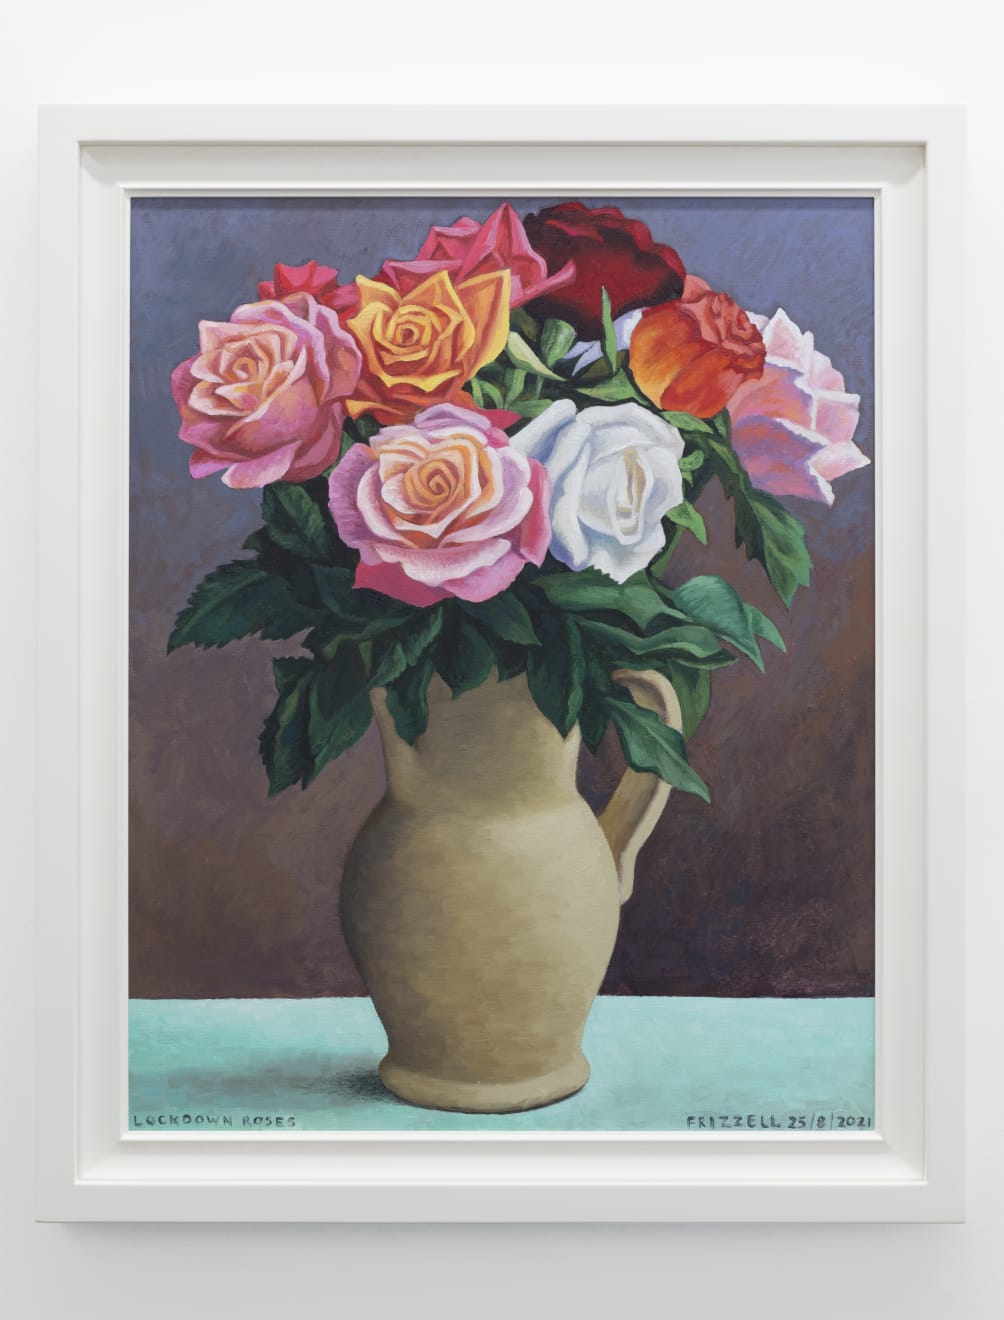 Dick FRIZZELL, Lockdown Roses, 2021